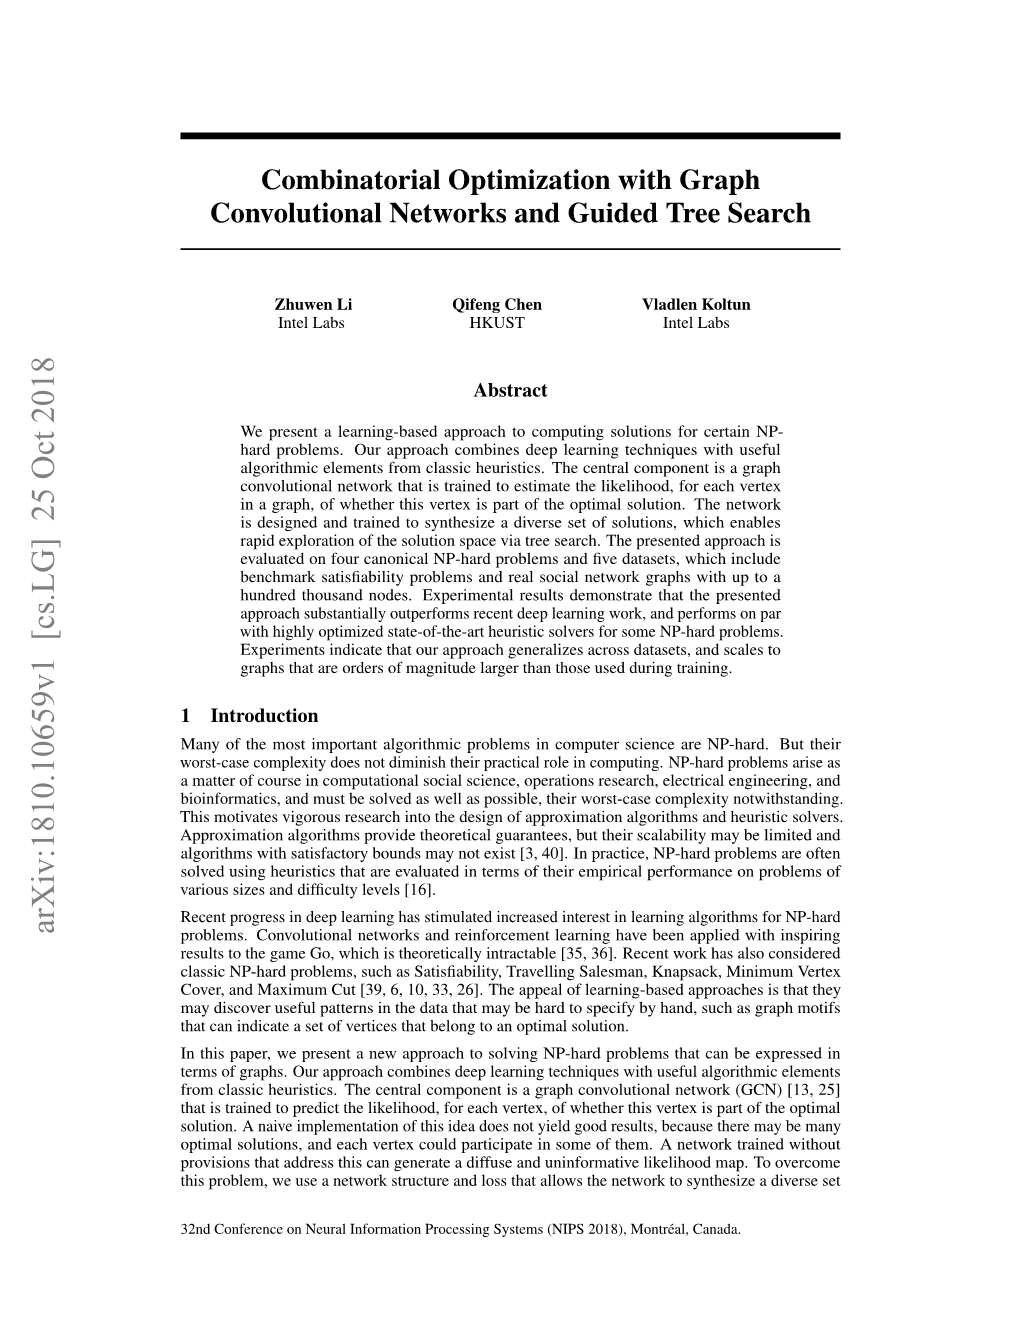 Combinatorial Optimization with Graph Convolutional Networks and Guided Tree Search